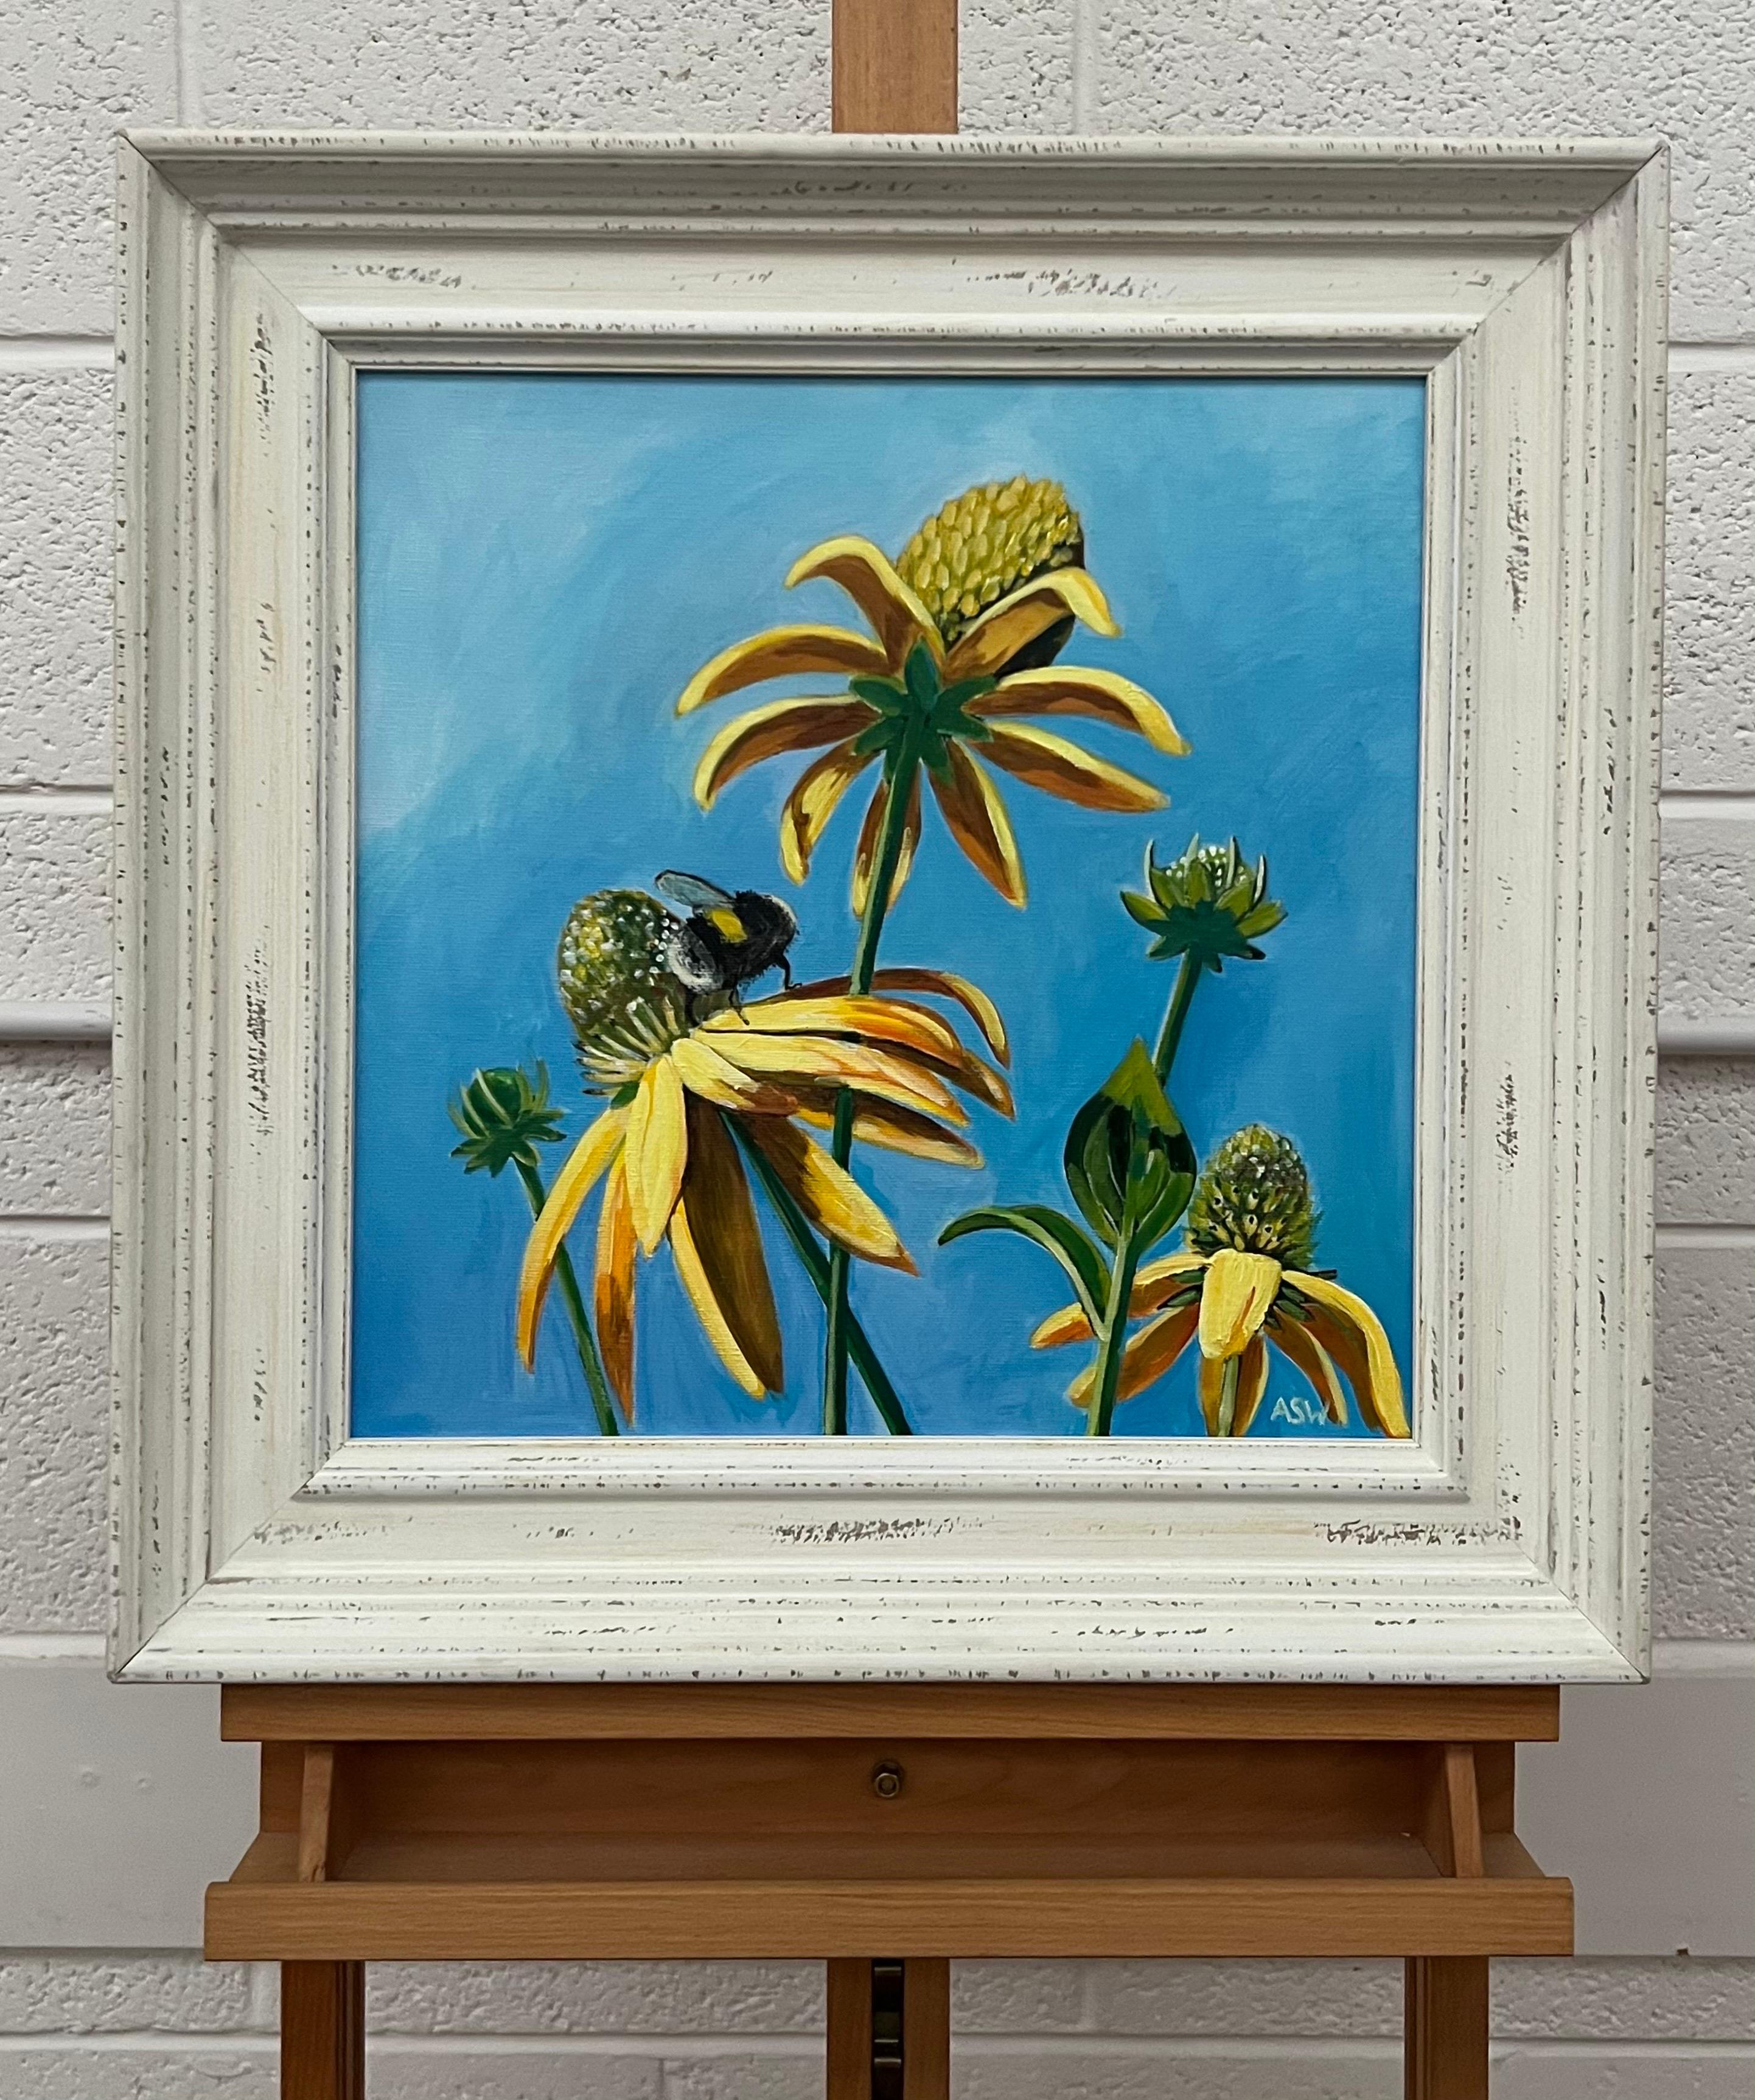 English Country Garden Landscape Art with Bee on Flowers by Contemporary British Artist, Angela Wakefield. This original uses a limited palette of sky blue and yellow. 

Art measures 16 x 16 inches
Frame measures 22 x 22 inches

Angela Wakefield has